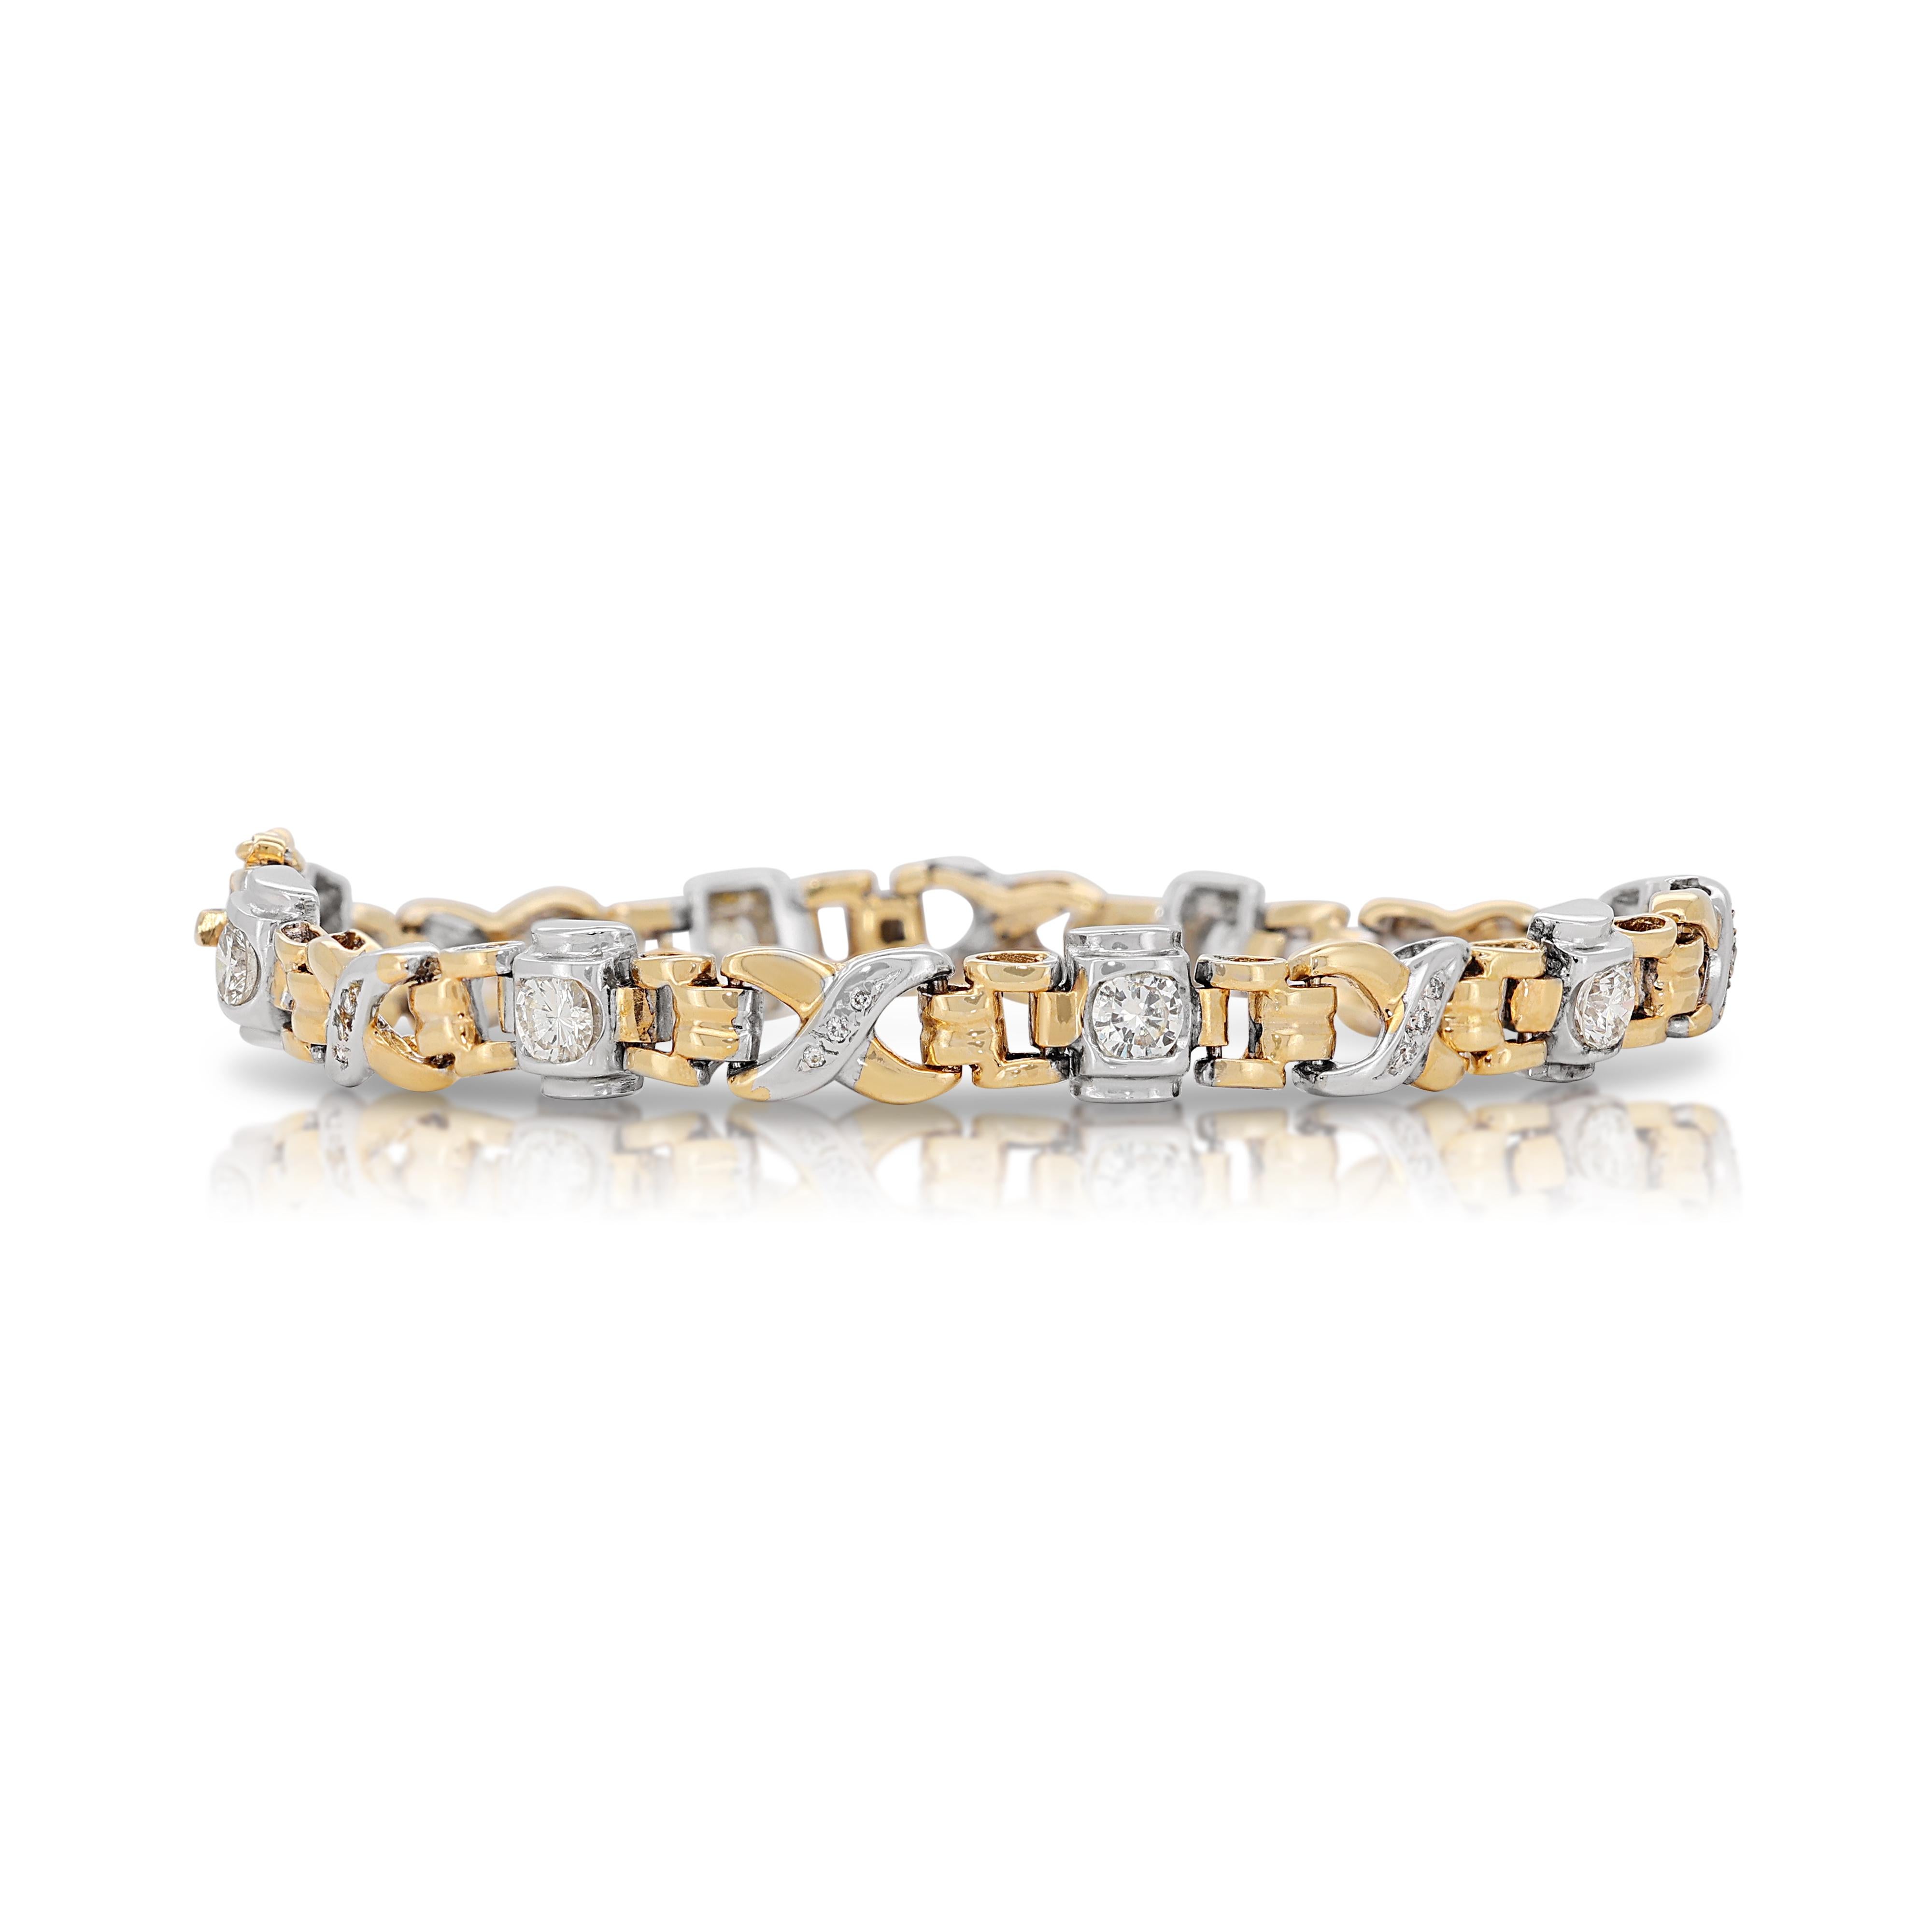 Women's Exquisite 1.44ct Diamonds Bracelet in 18K White and Yellow Gold For Sale